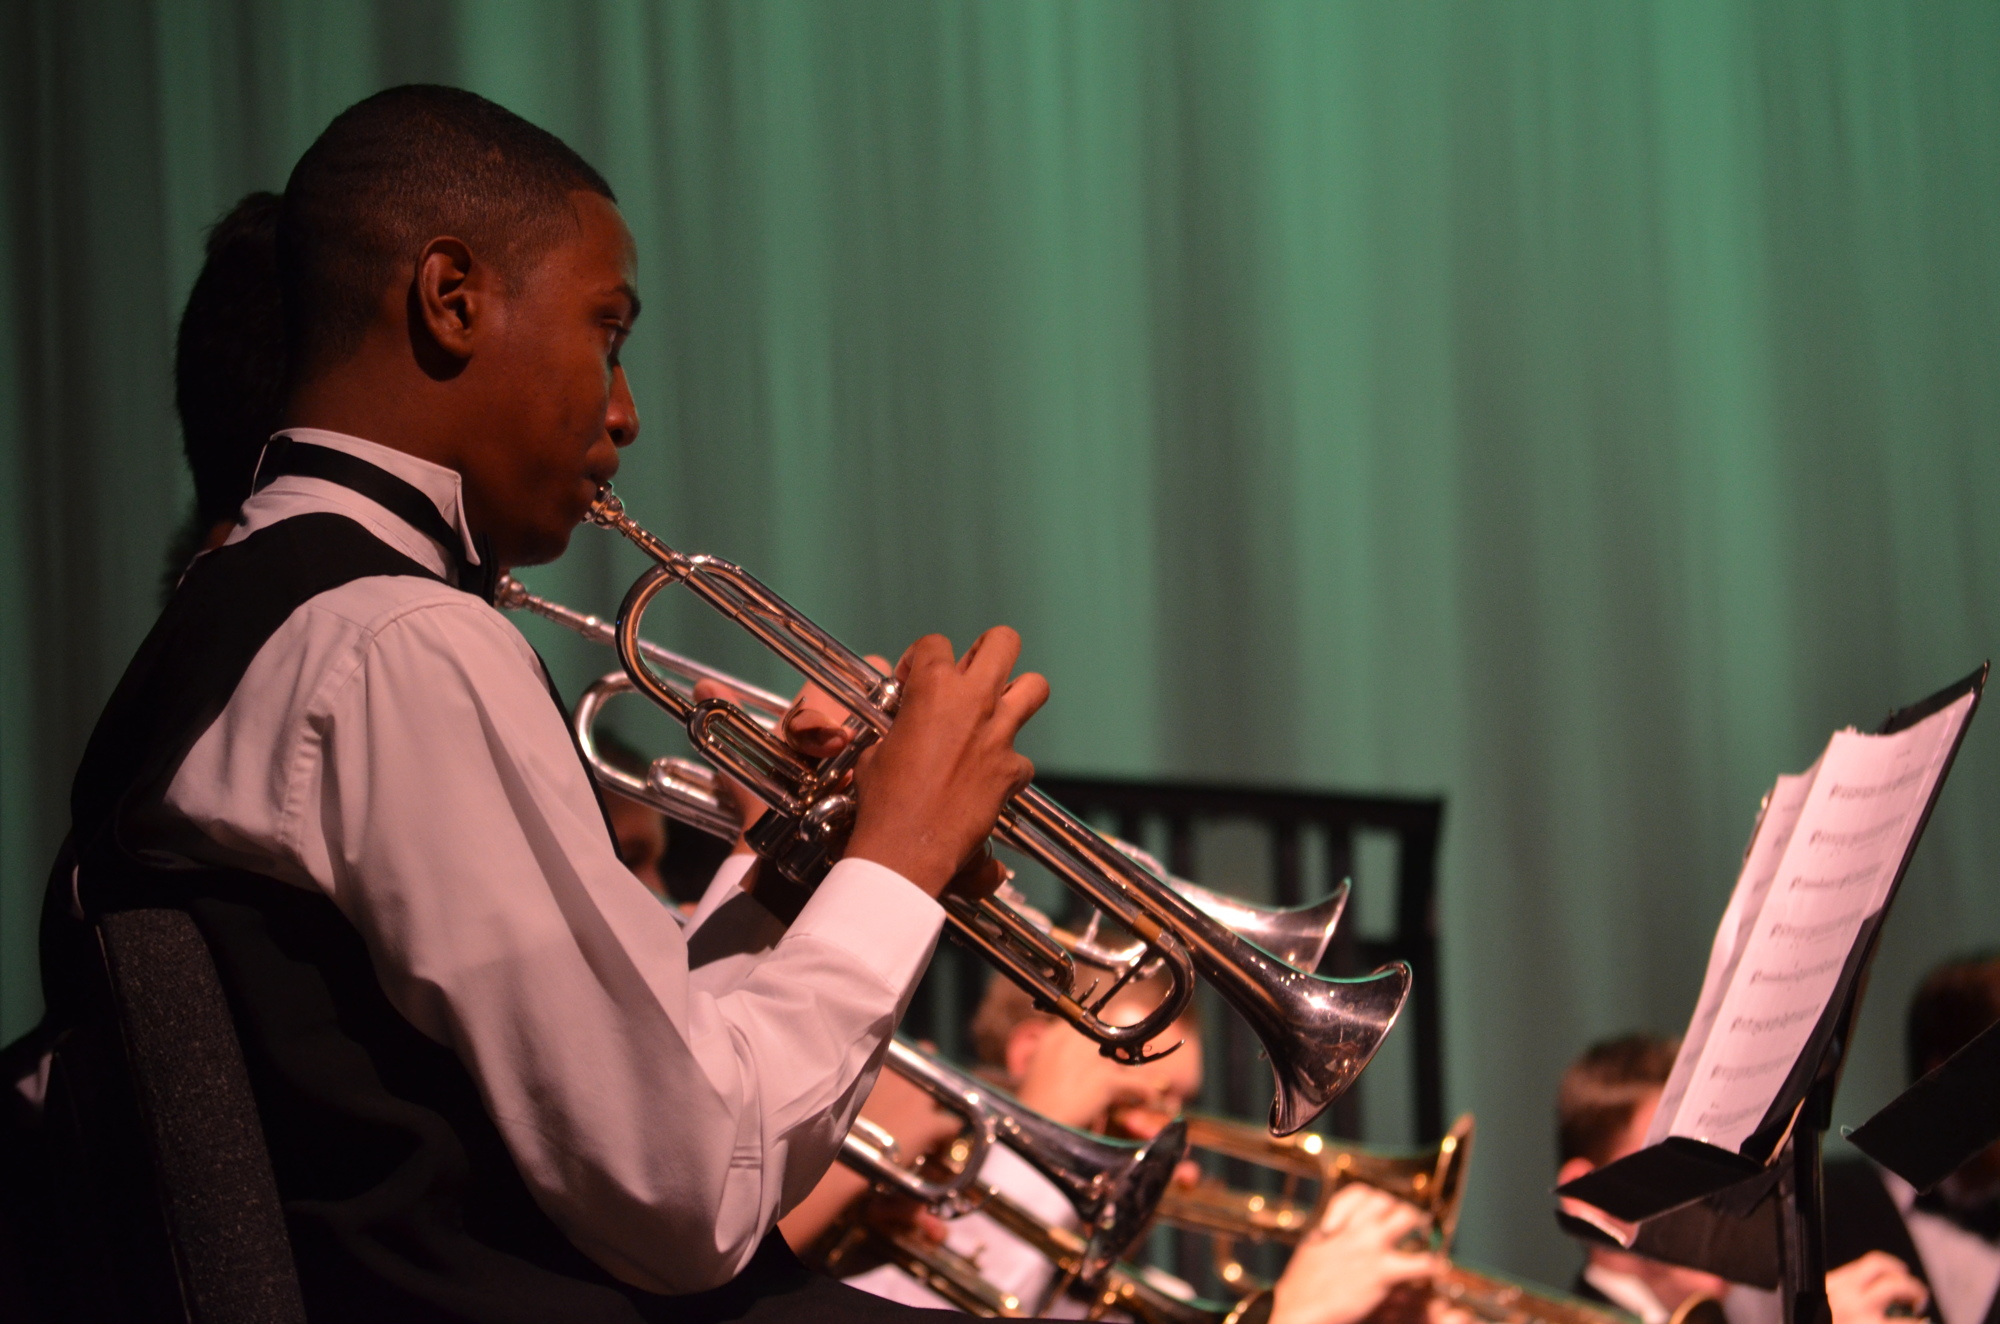 Trumpet player Dashwood Payen performs a Christmas song during a holiday performance.